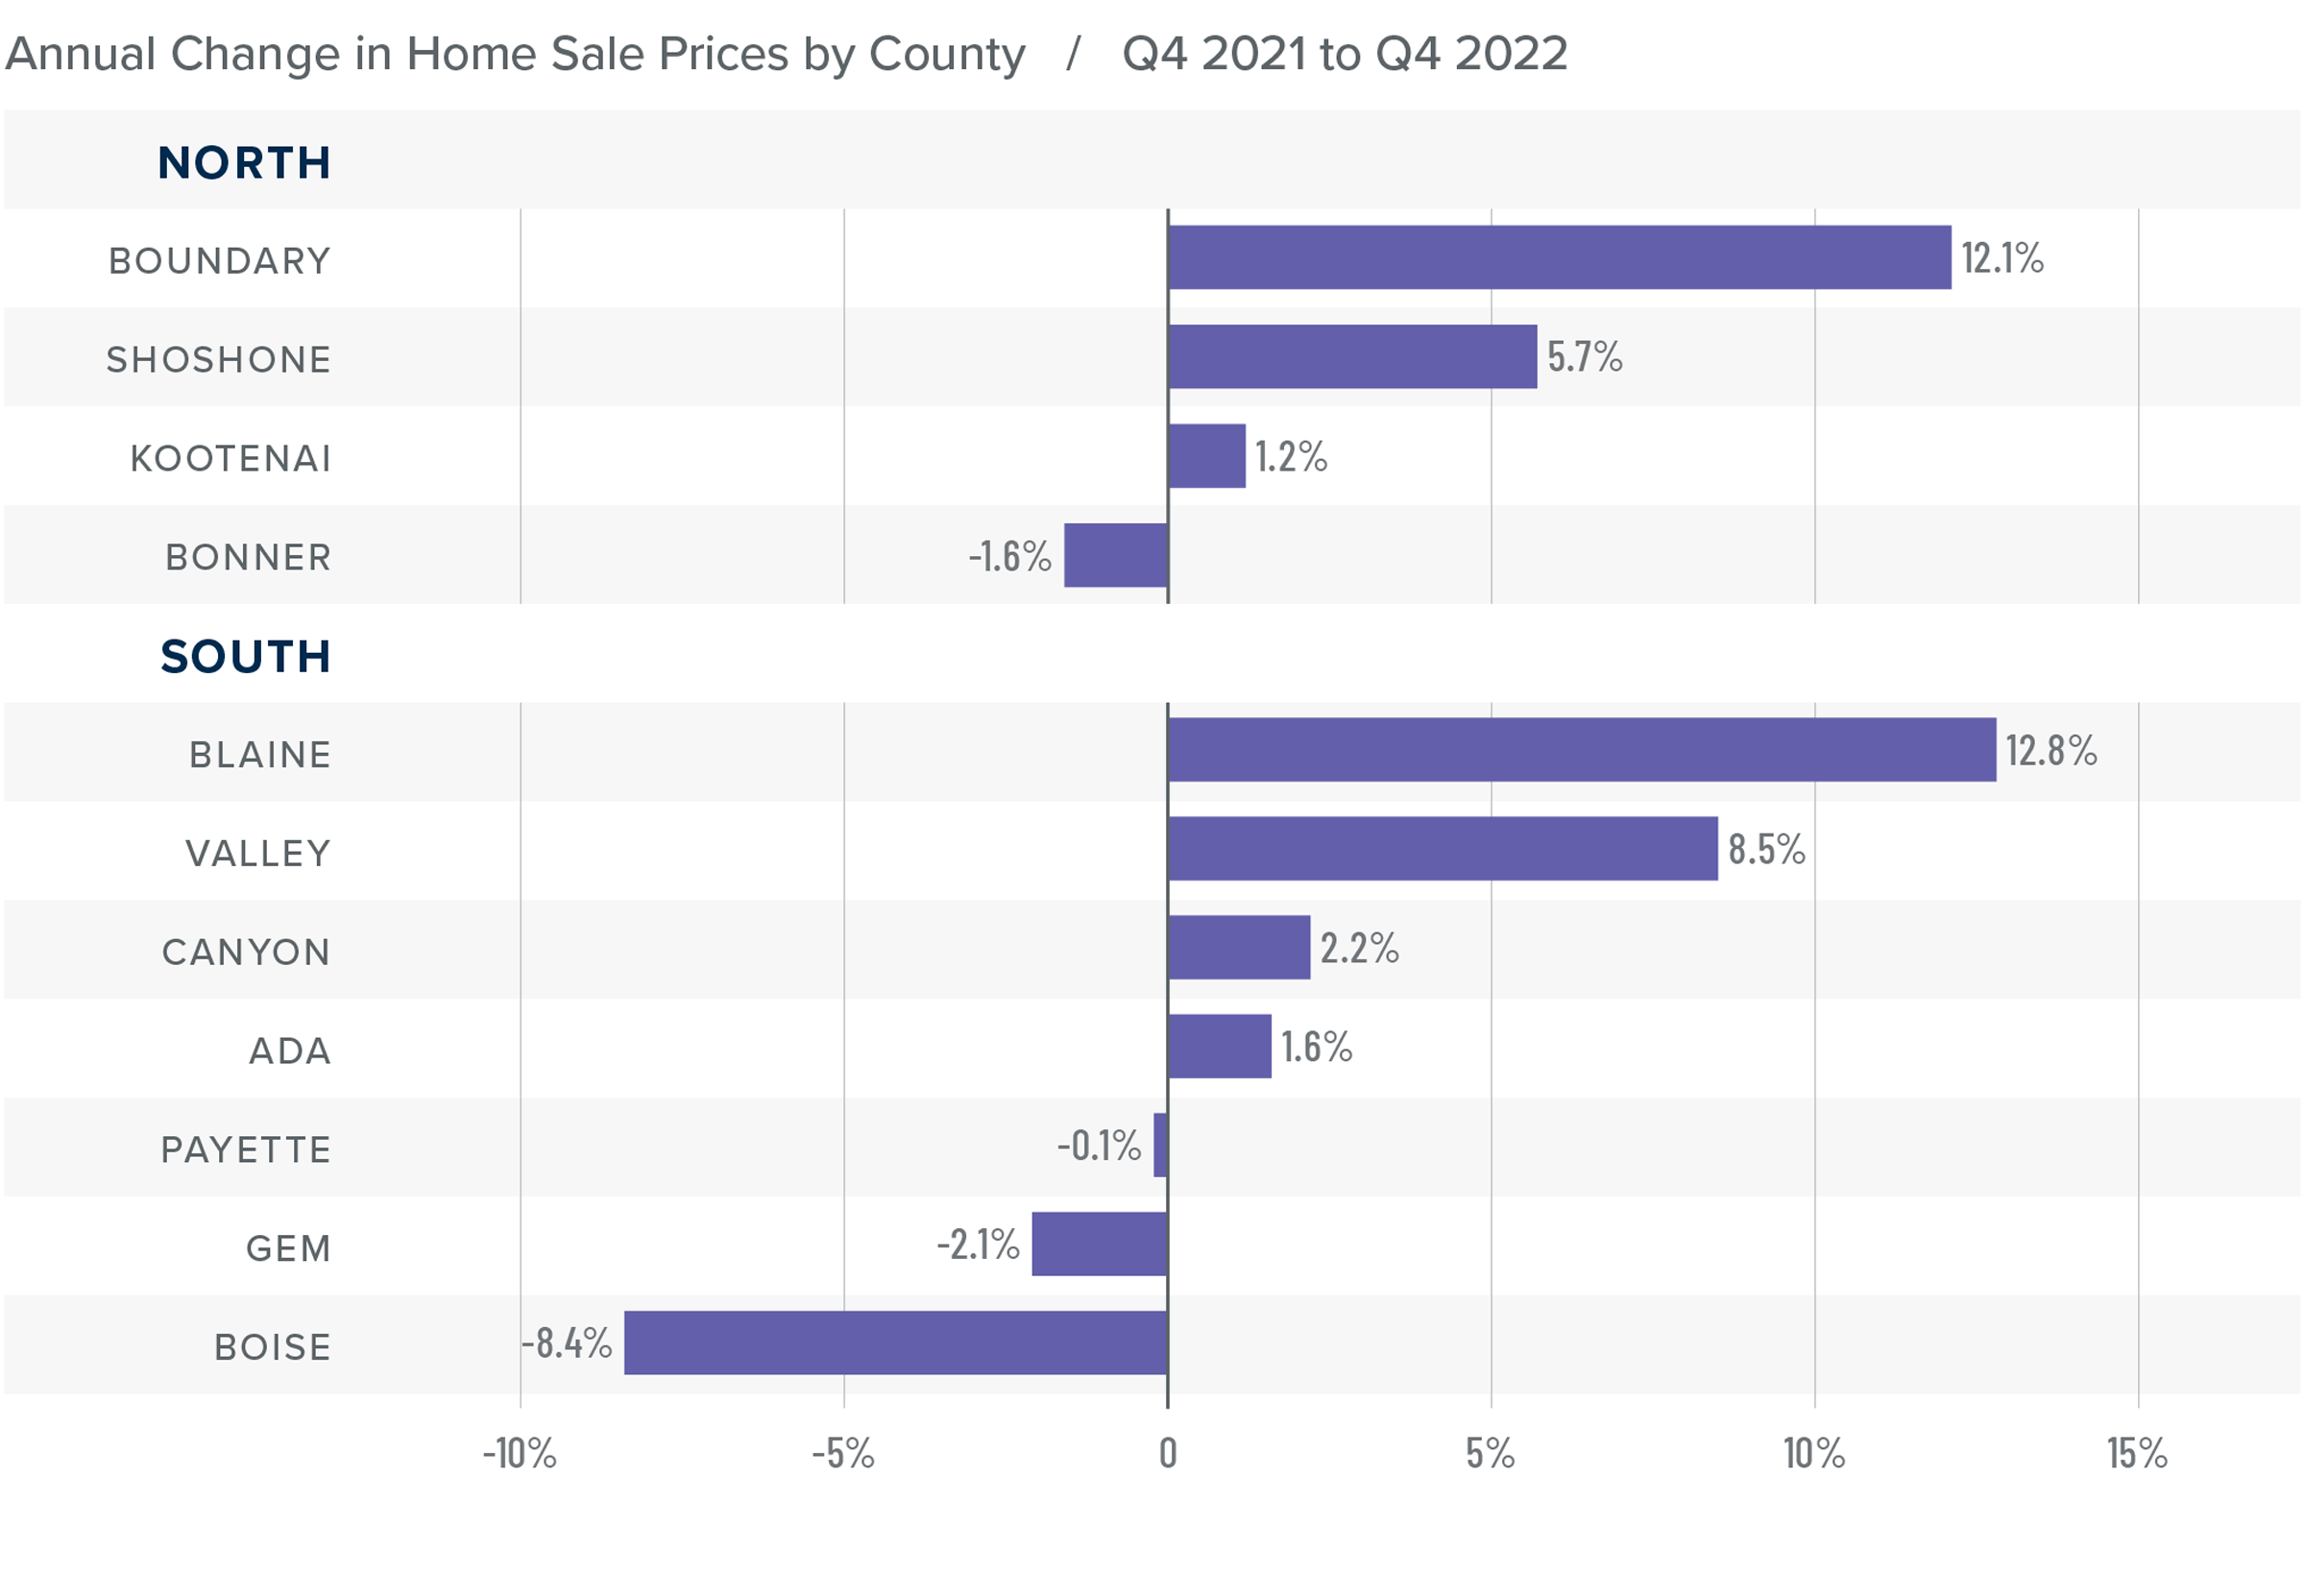 A bar graph showing the annual change in home sale prices for various counties in North and South Idaho from Q4 2021 to Q4 2022. In North Idaho, Boundary County tops the list at 12.1%, followed by Shoshone at 5.7%, Kootenai at 1.2%, and Bonner at -1.6%. In South Idaho, it's Blaine at 12.8%, Valley at 8.5%, Canyon at 2.2%, Ada at 1.6%, Payette at -0.1%, Gem at -2.1%, and Boise at -8.4%.